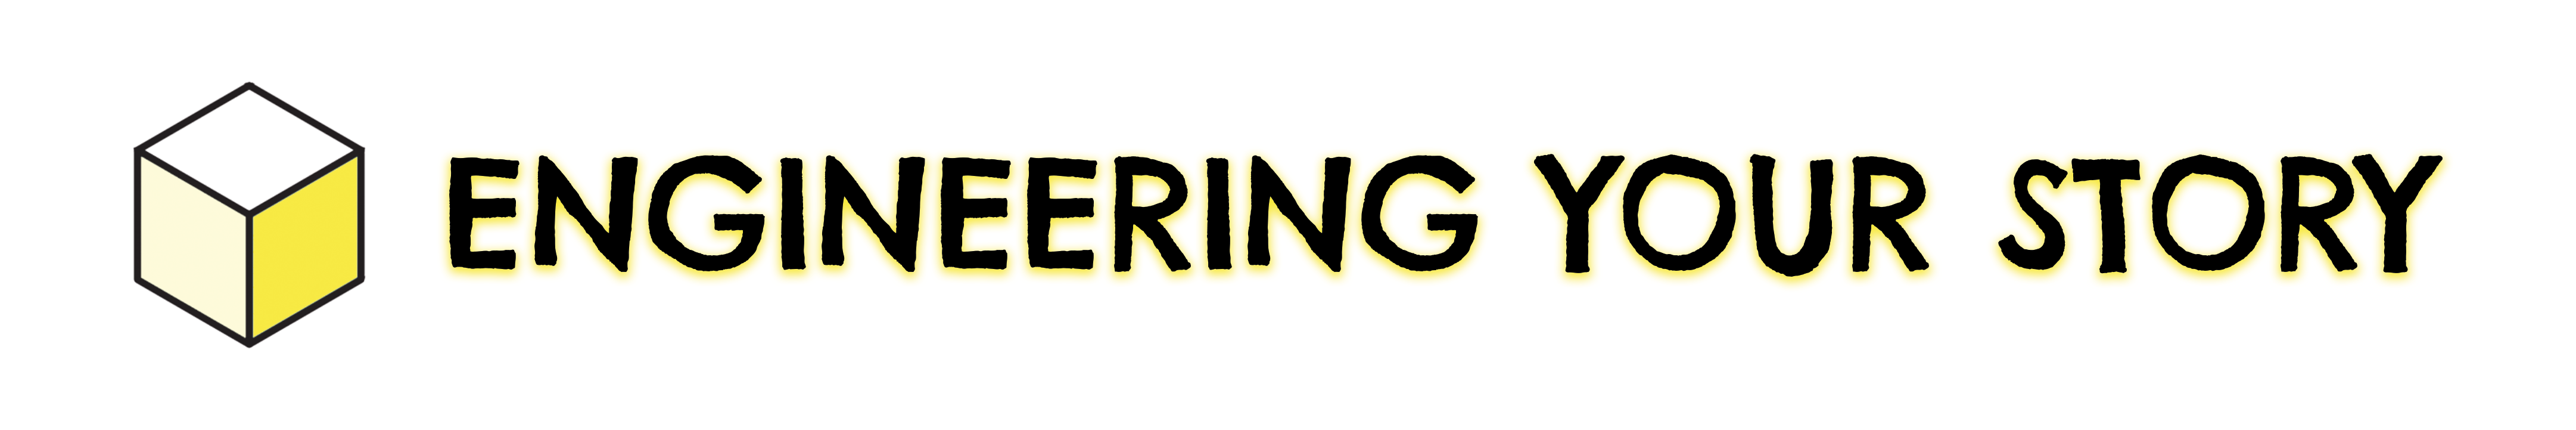 Engineering Your Story logo